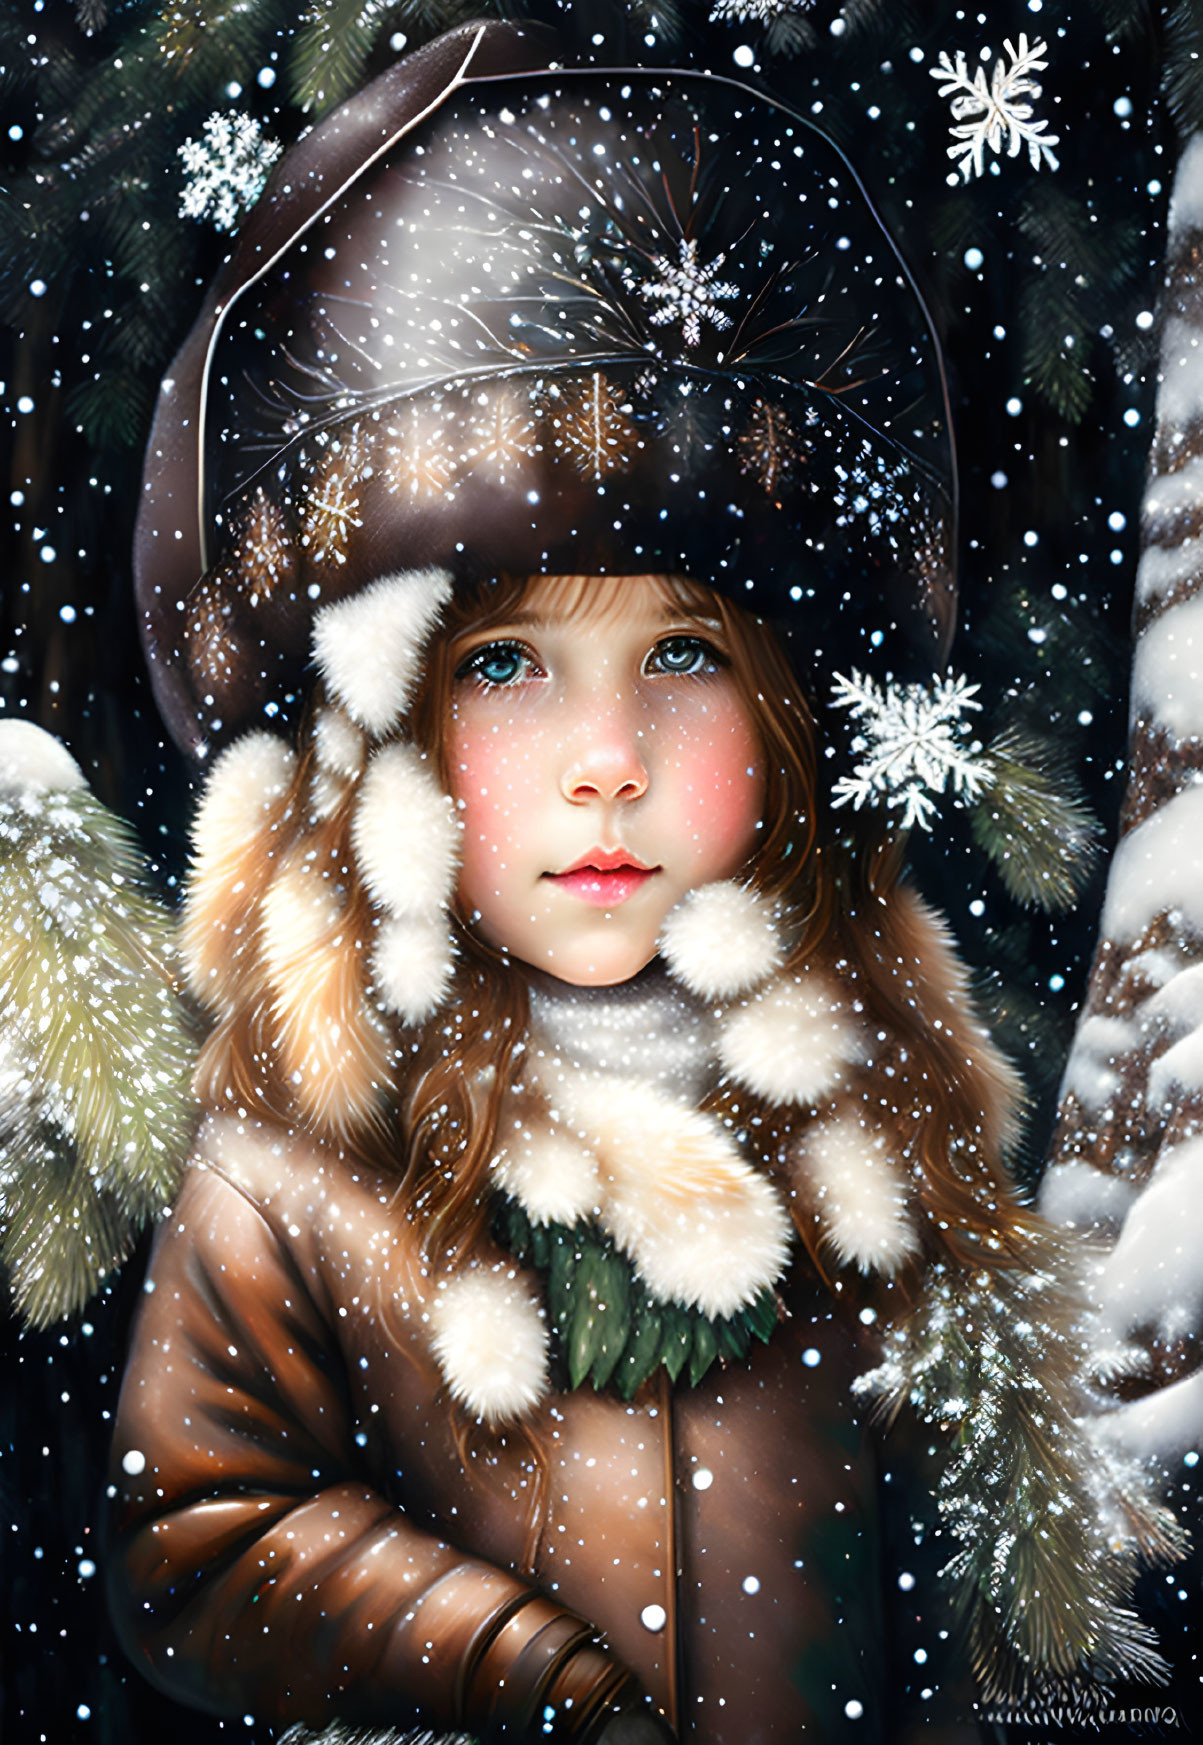 Young girl in winter coat and hat with falling snowflakes and snow-covered trees